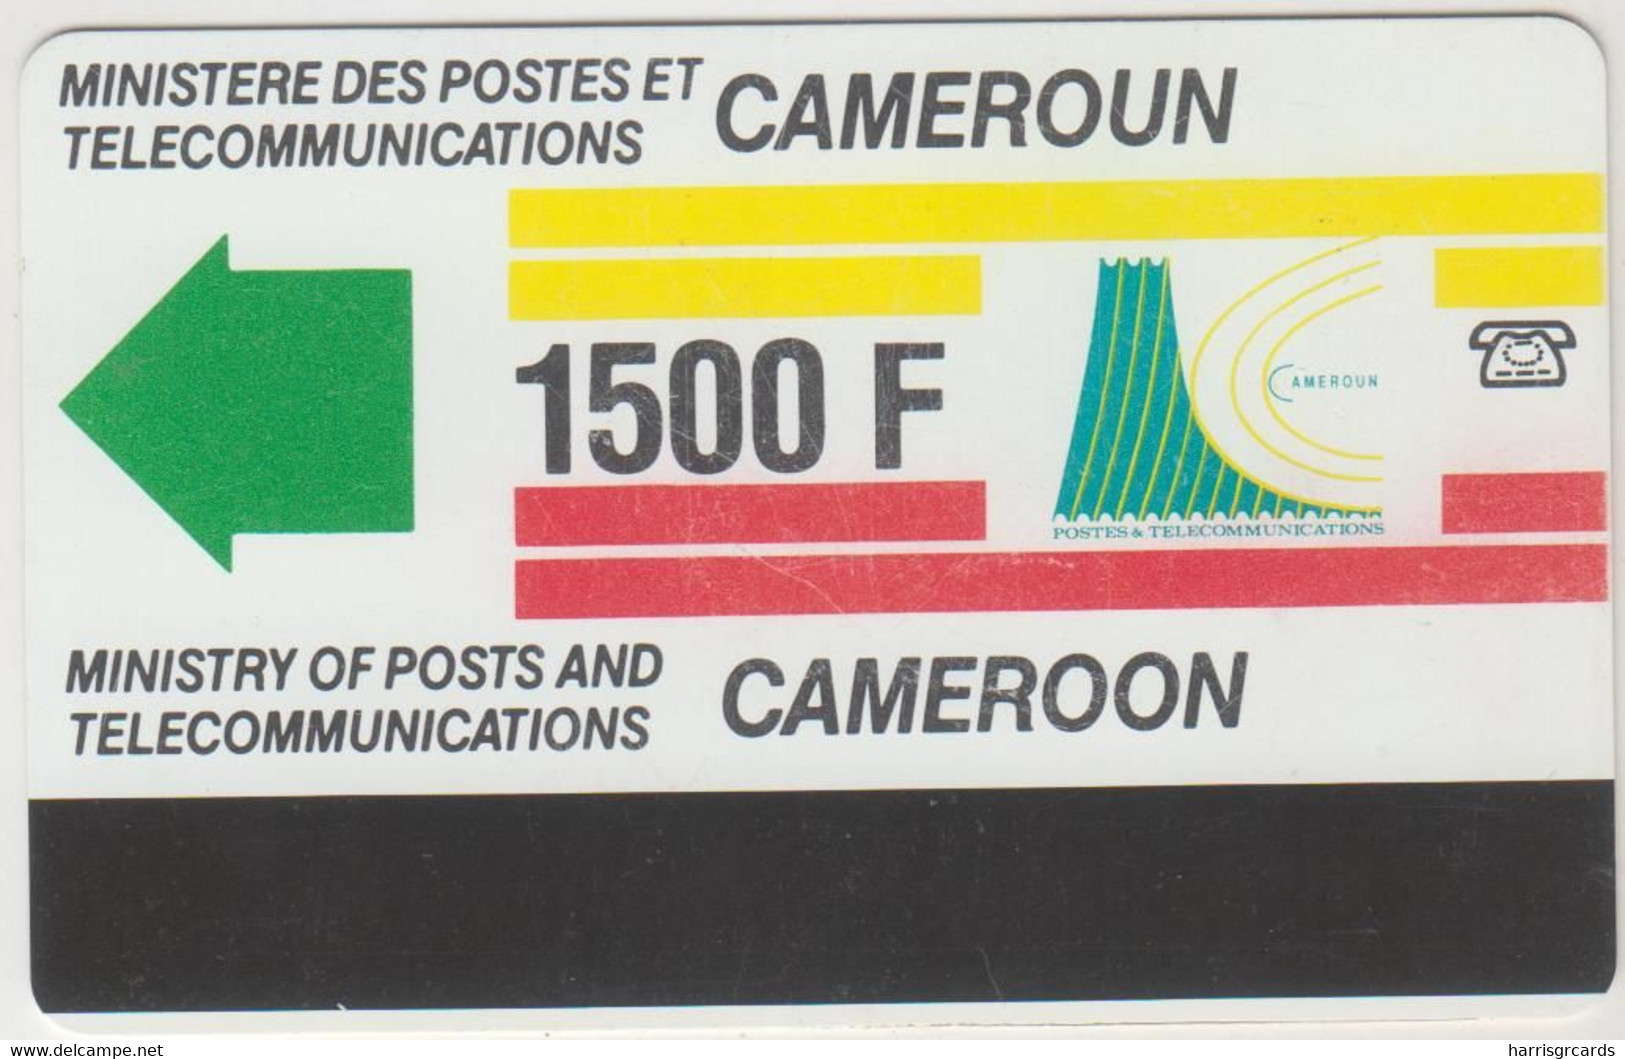 CAMEROON - Definitive Card - New Logo (Without Notch), Intelcam, 1500 FCFA, CN:Dashed Zero: "Ø" Large ,used - Cameroon